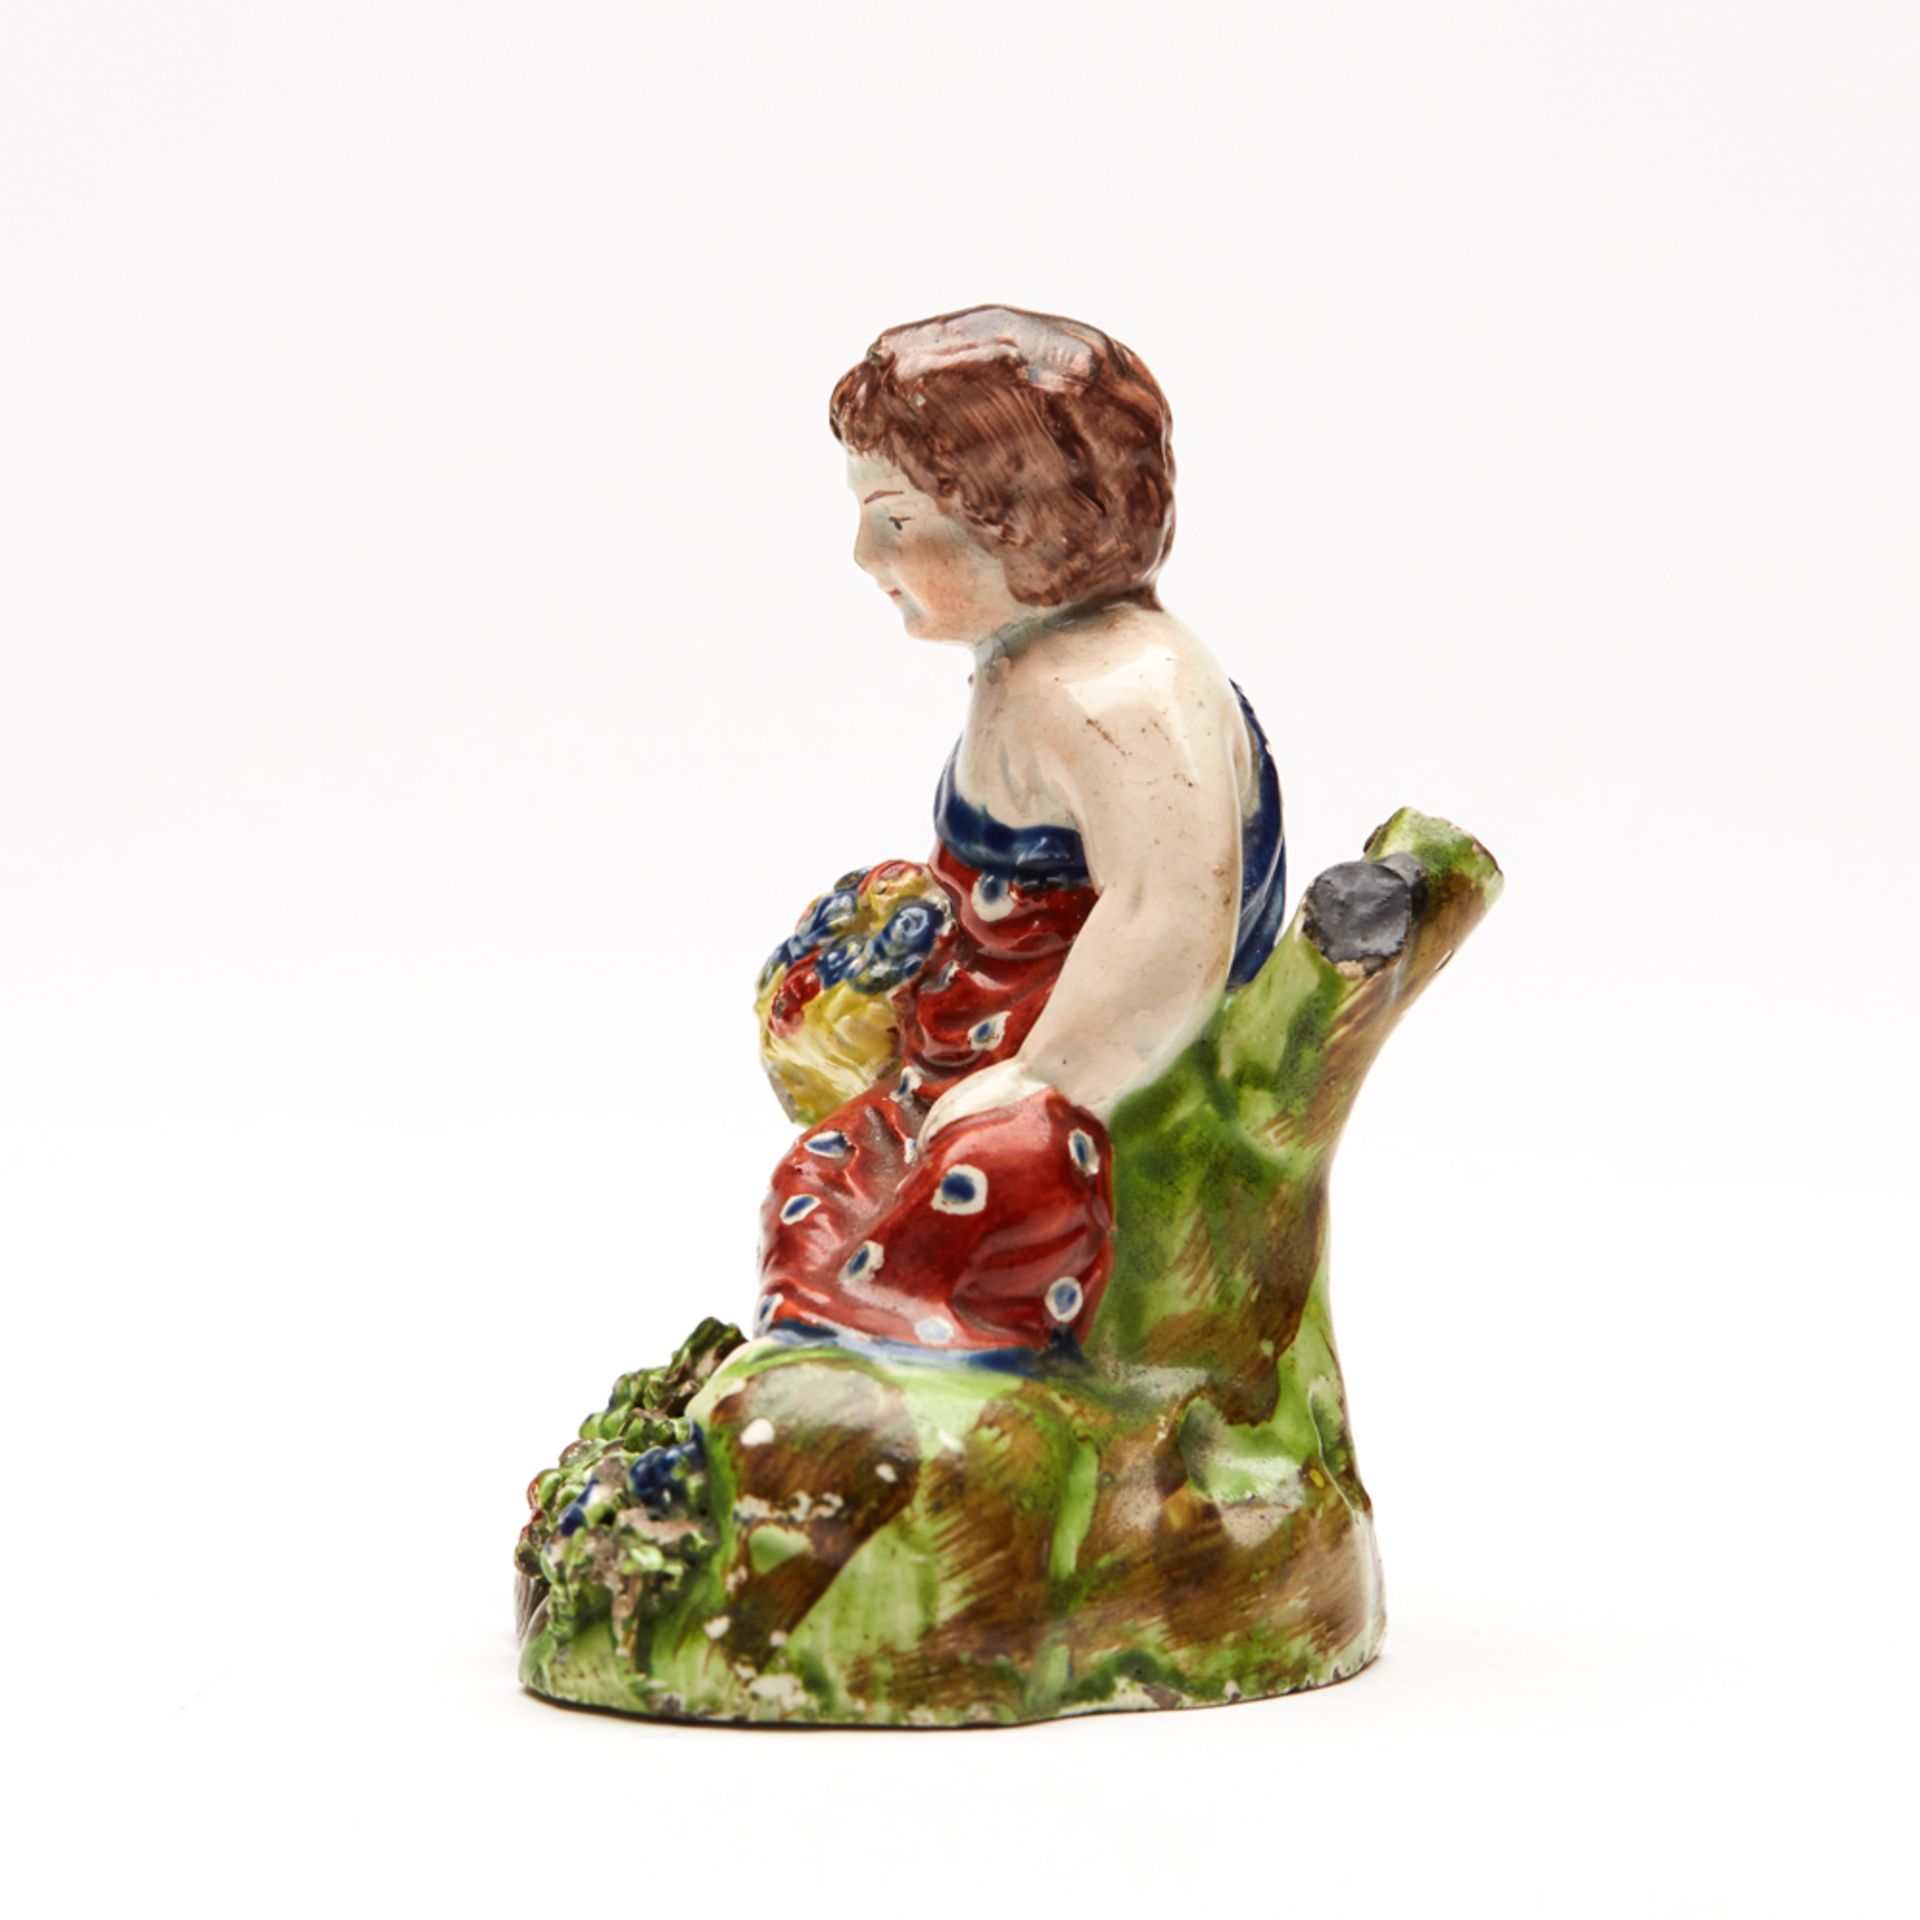 Antique Staffordshire Pearlware Seated Girl Figure C.1800 - Image 4 of 6